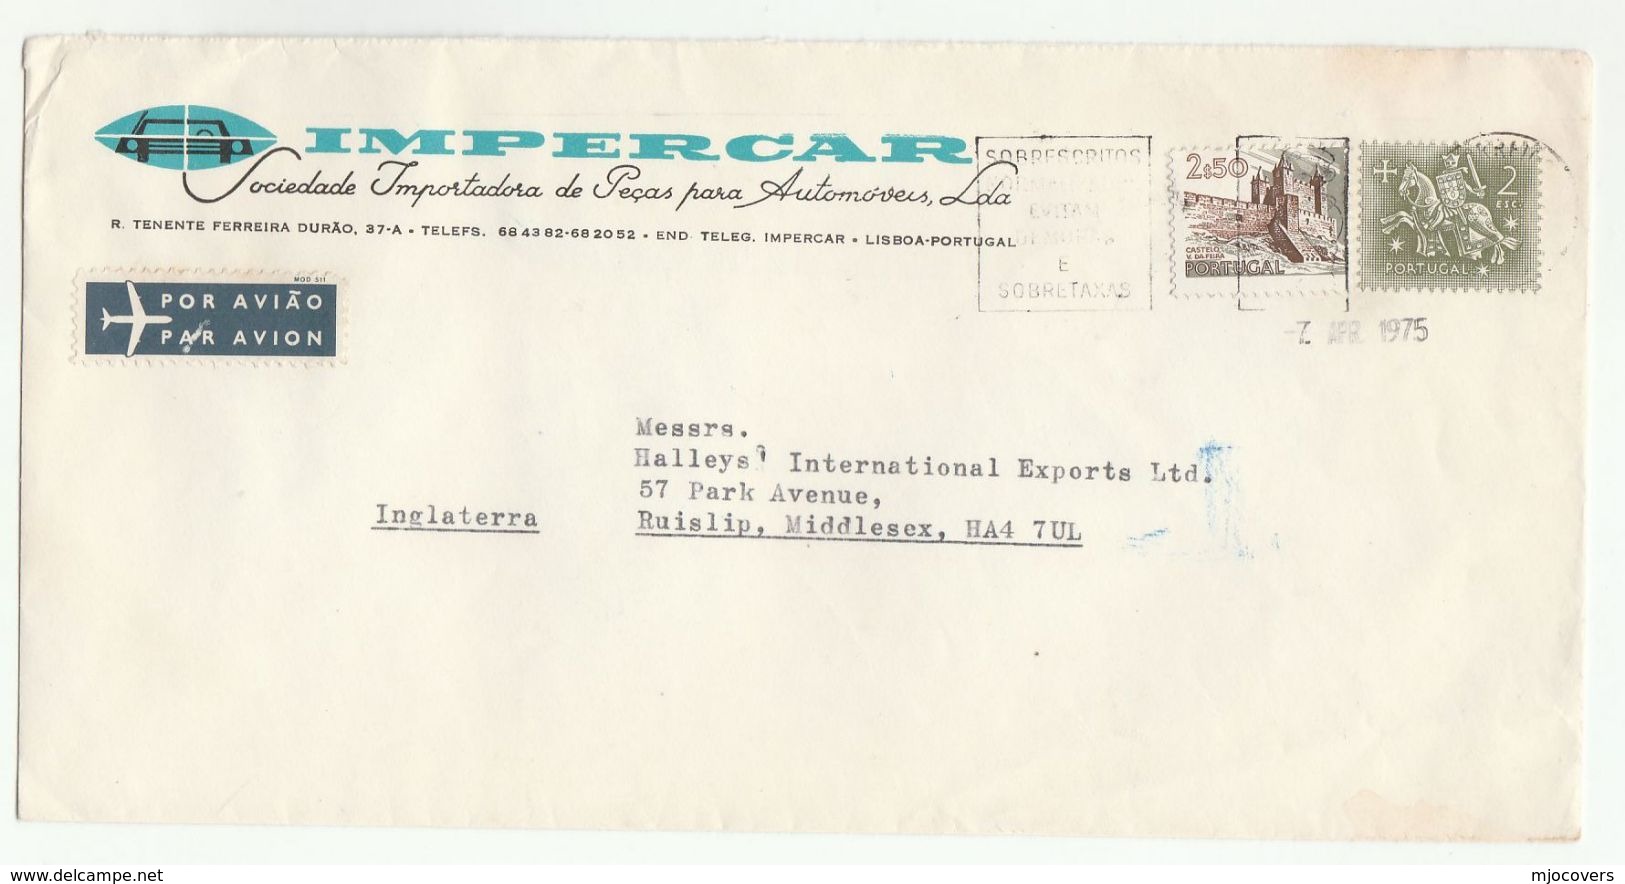 1975 Air Mail PORTUGAL Illus ADVERT COVER Impercar Auto Co KNIGHT HORSE Stamps To GB Airmail Label - Briefe U. Dokumente